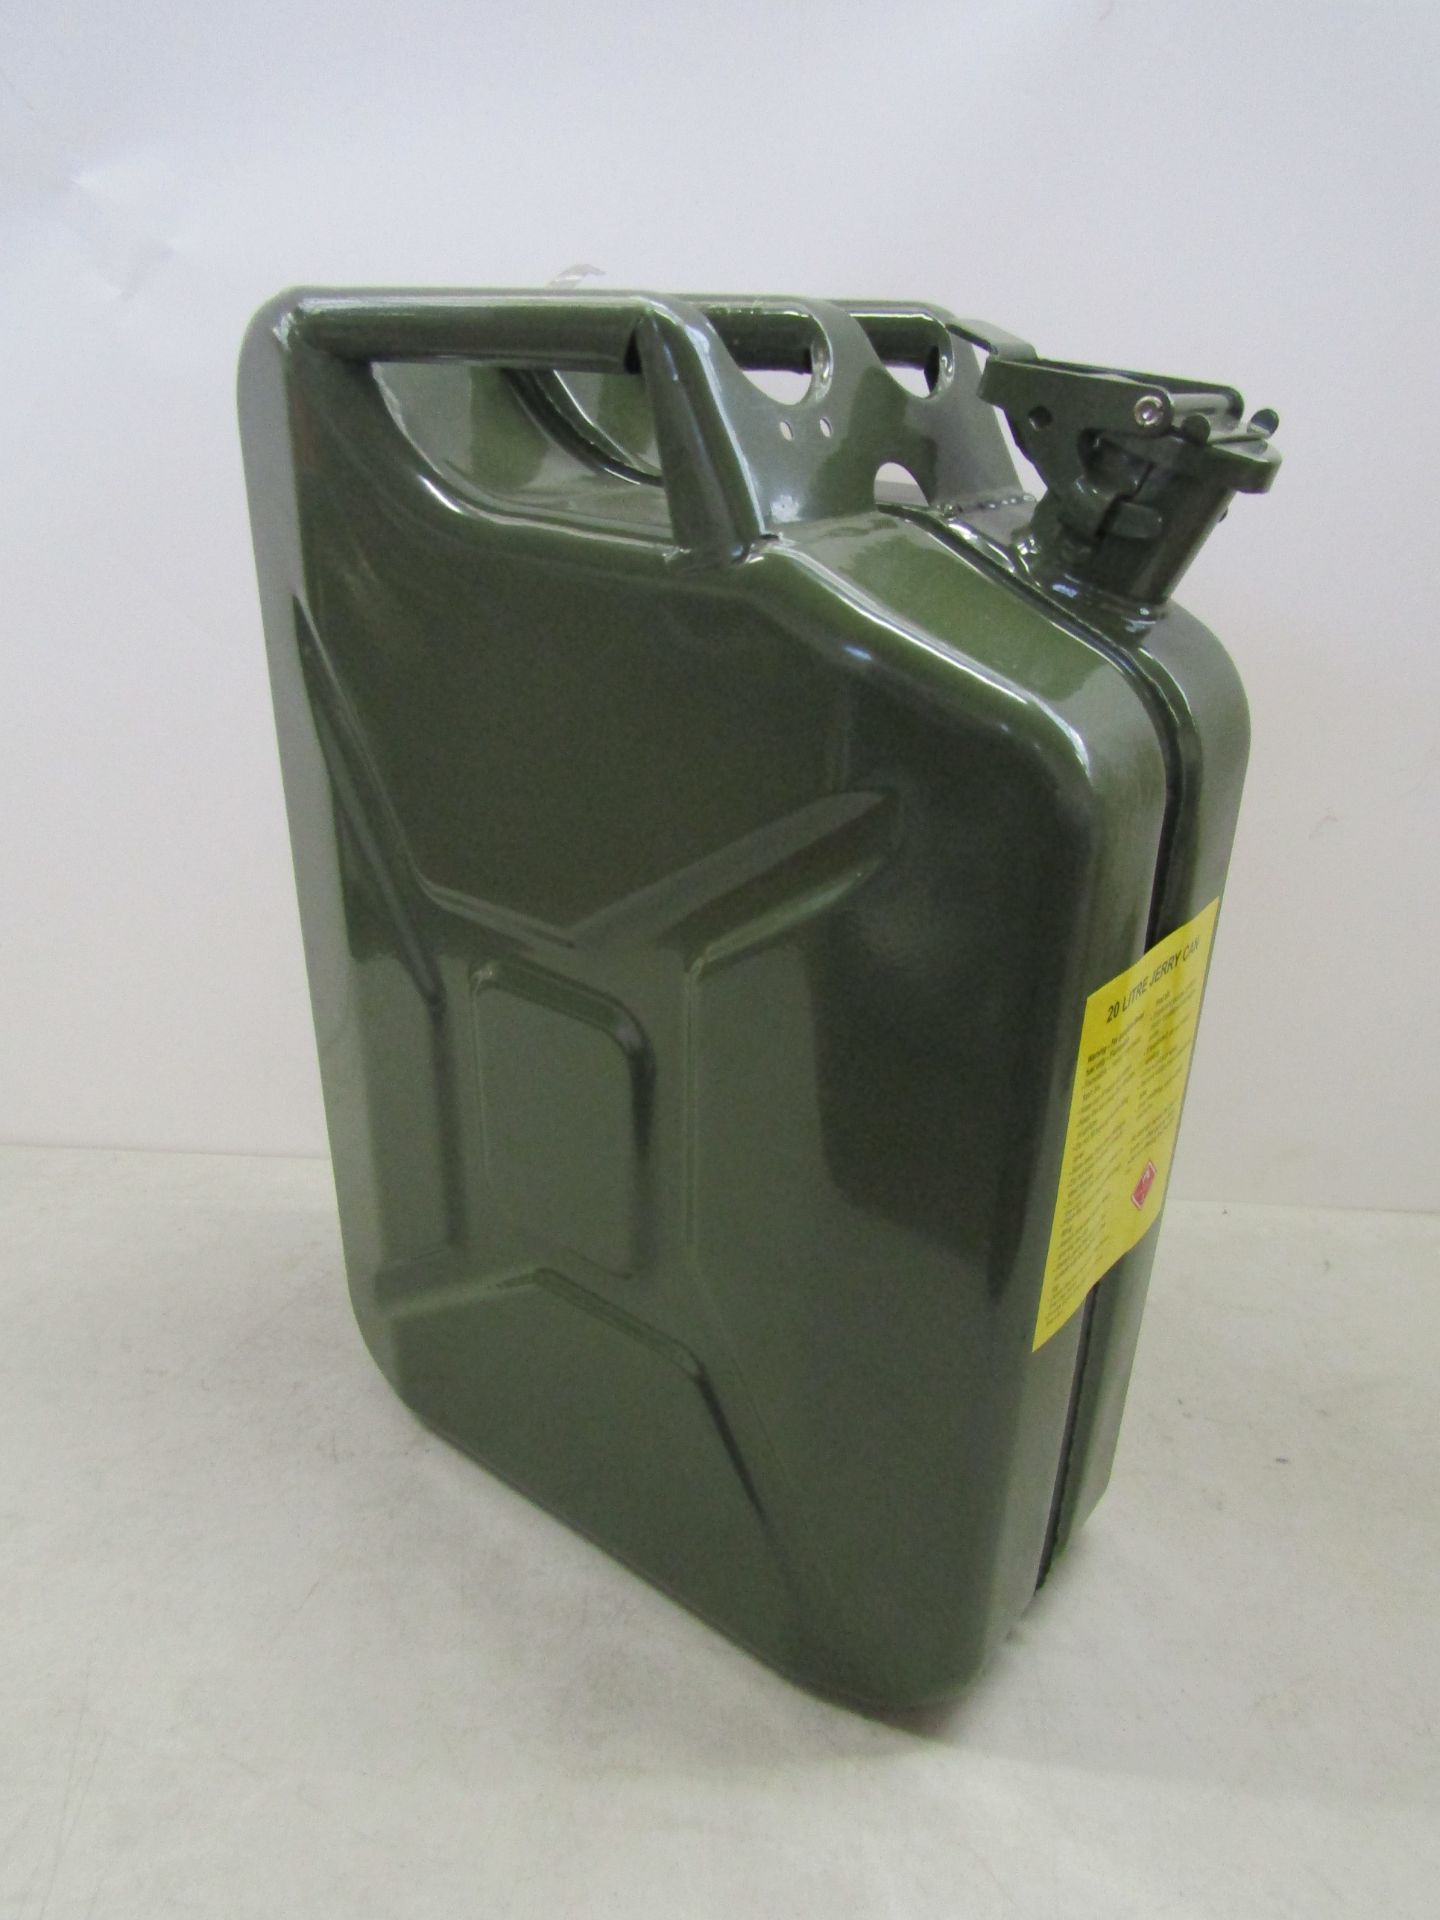 20L Olive green colour jerry can, has been used.